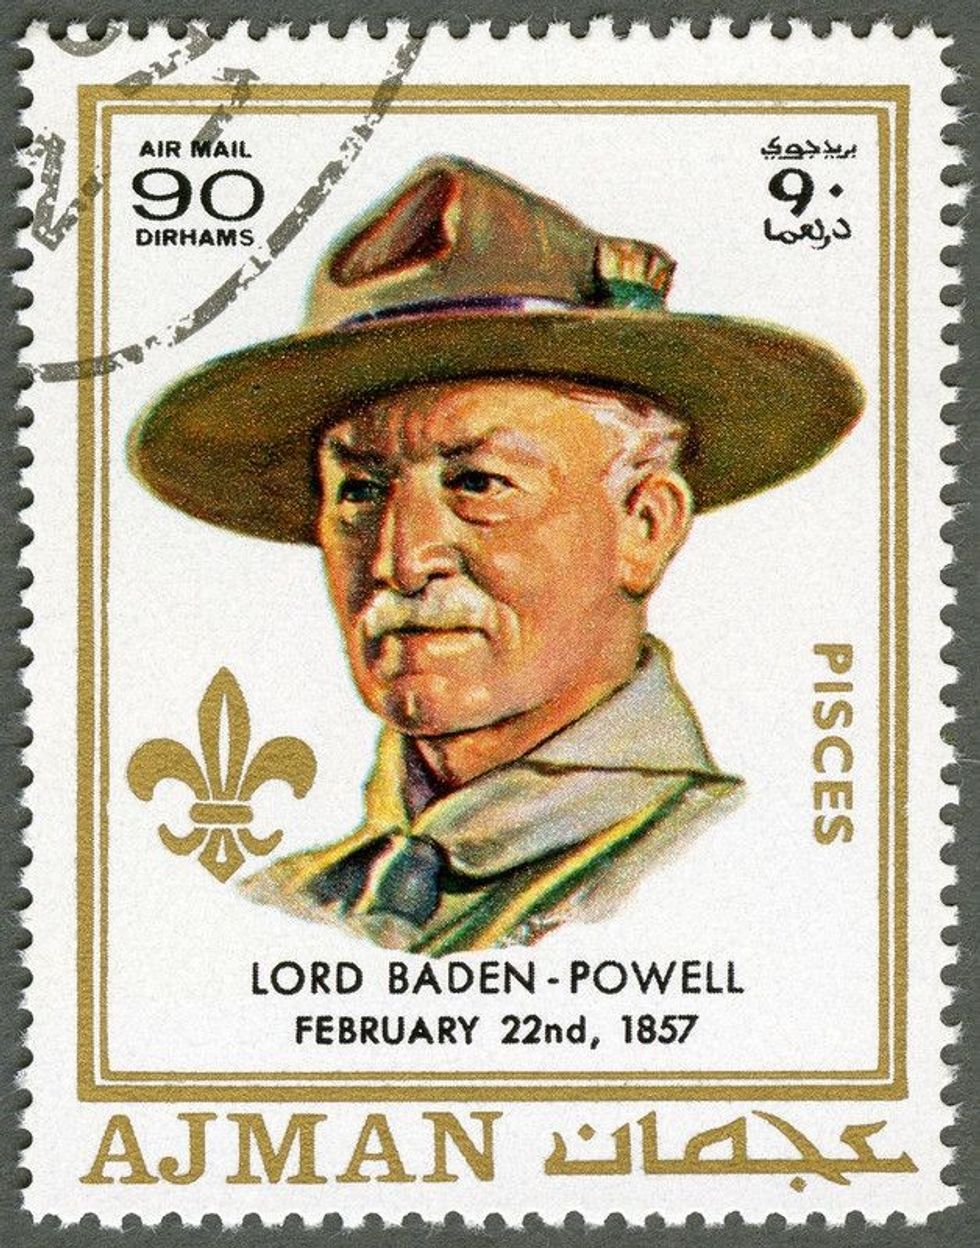 A stamp printed in Ajman shows Robert Baden-Powell (1857-1941)